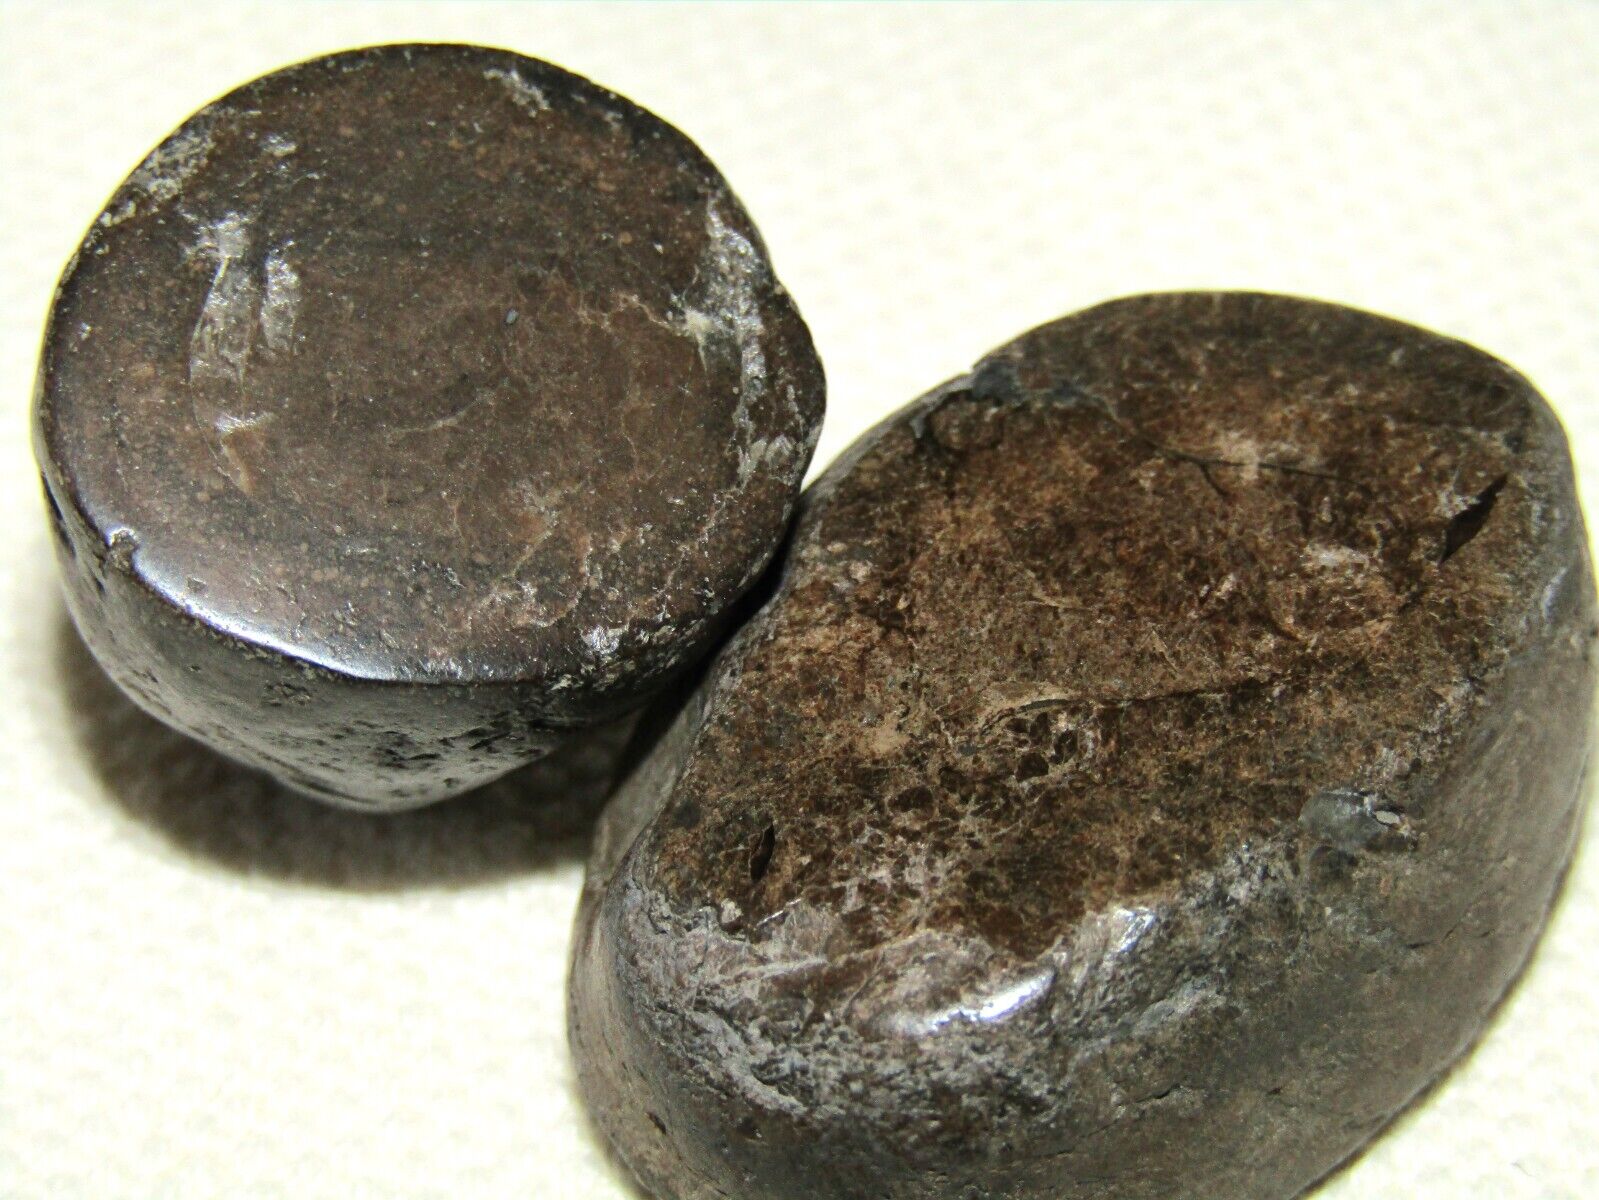 2x Late Triassic/Jurassic Marine Coprolites with Hand Polished Facets